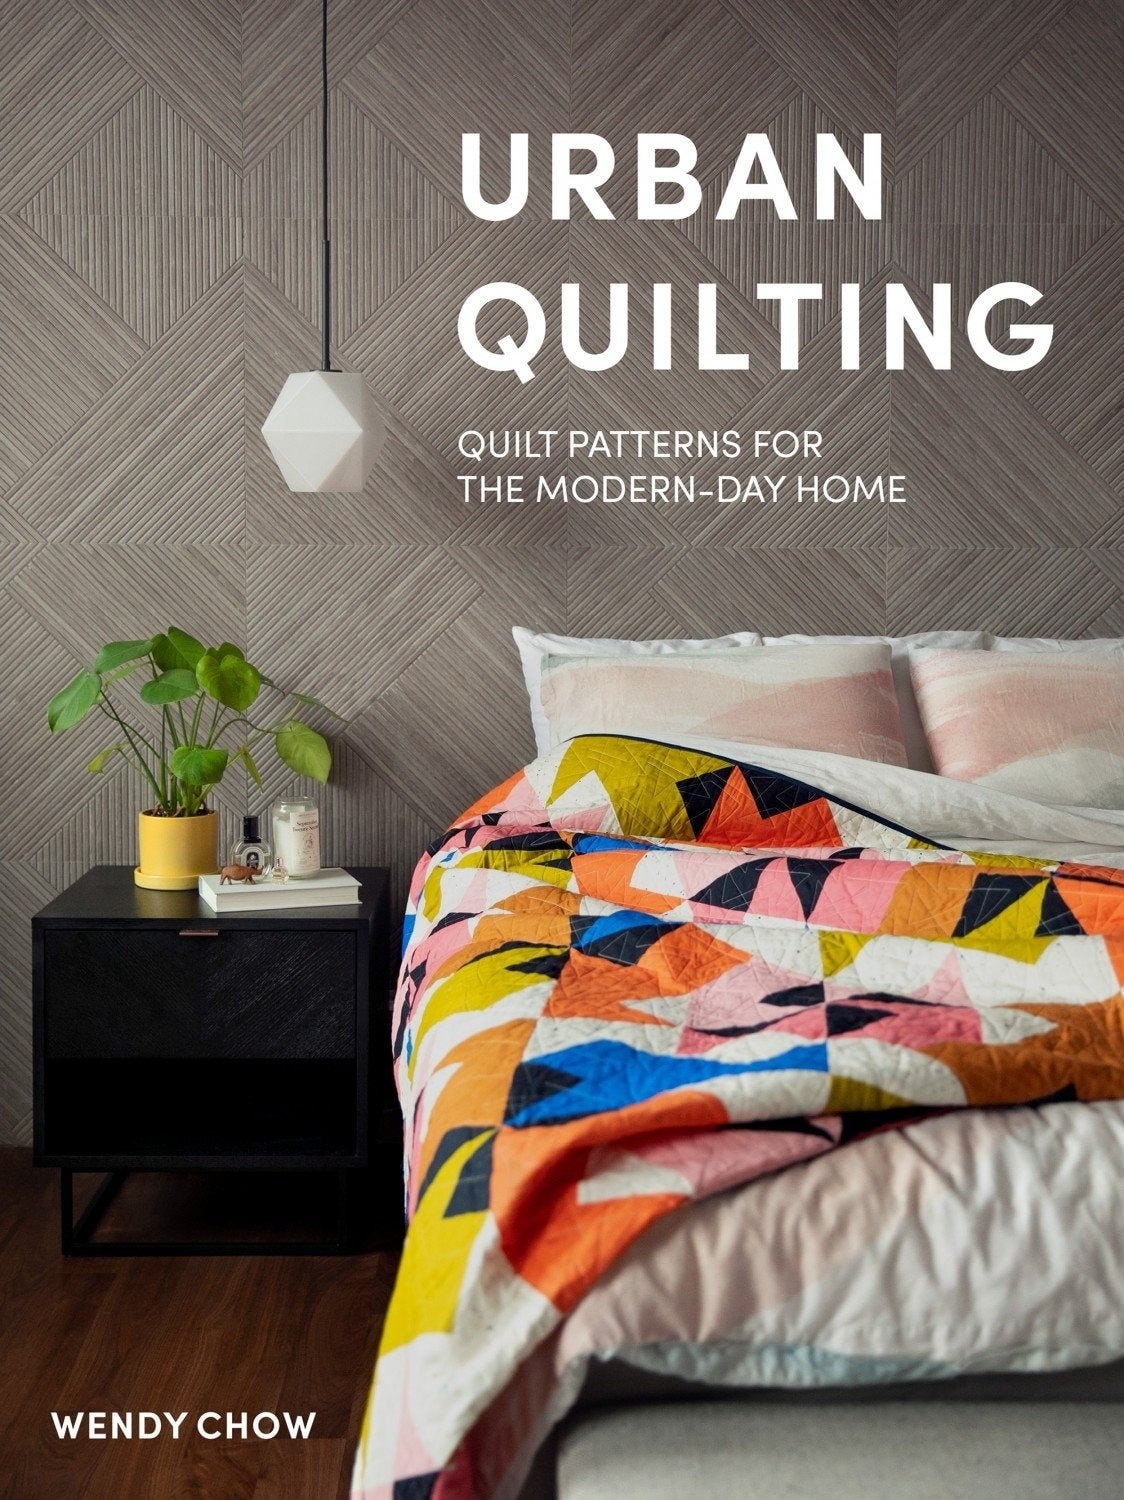 Urban Quilting, Quilt Patterns For The Modern-Day Home Hard Back Book Wendy Chowo for Schlafzimmer Modern Quilts